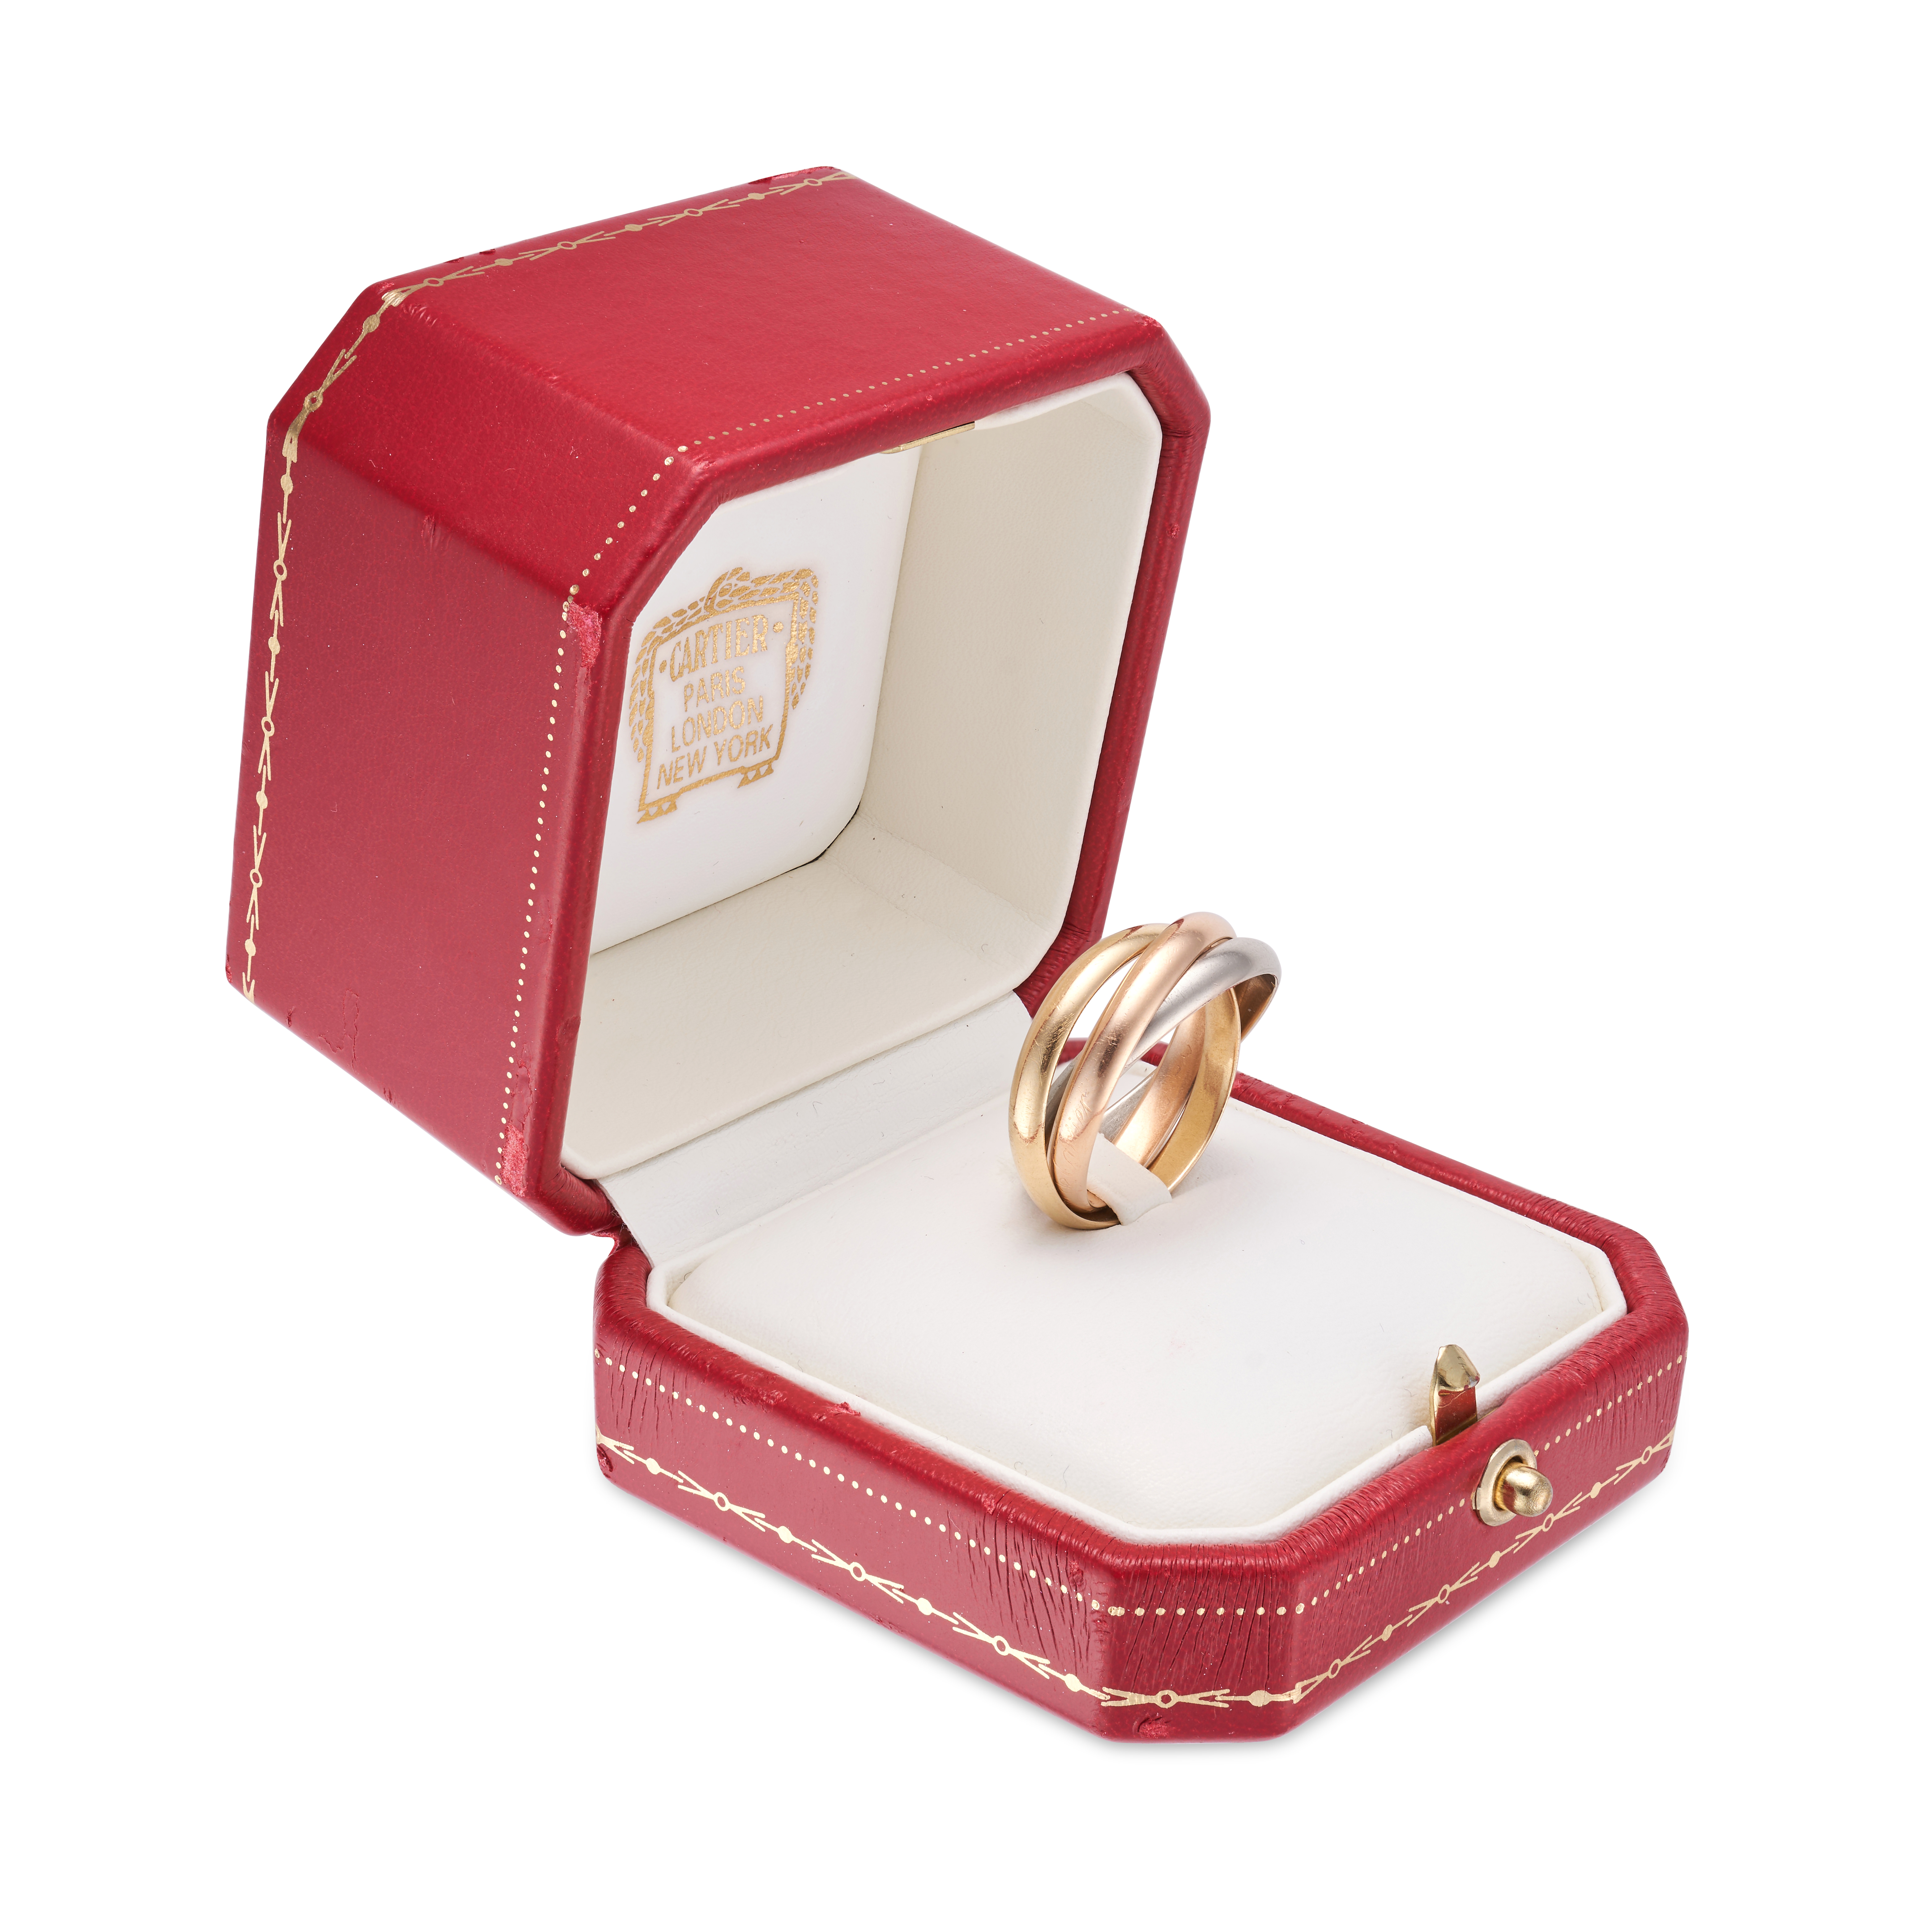 LES MUST DE CARTIER, A TRINITY RING in 18ct gold and platinum, comprising three interlocking band... - Image 3 of 4